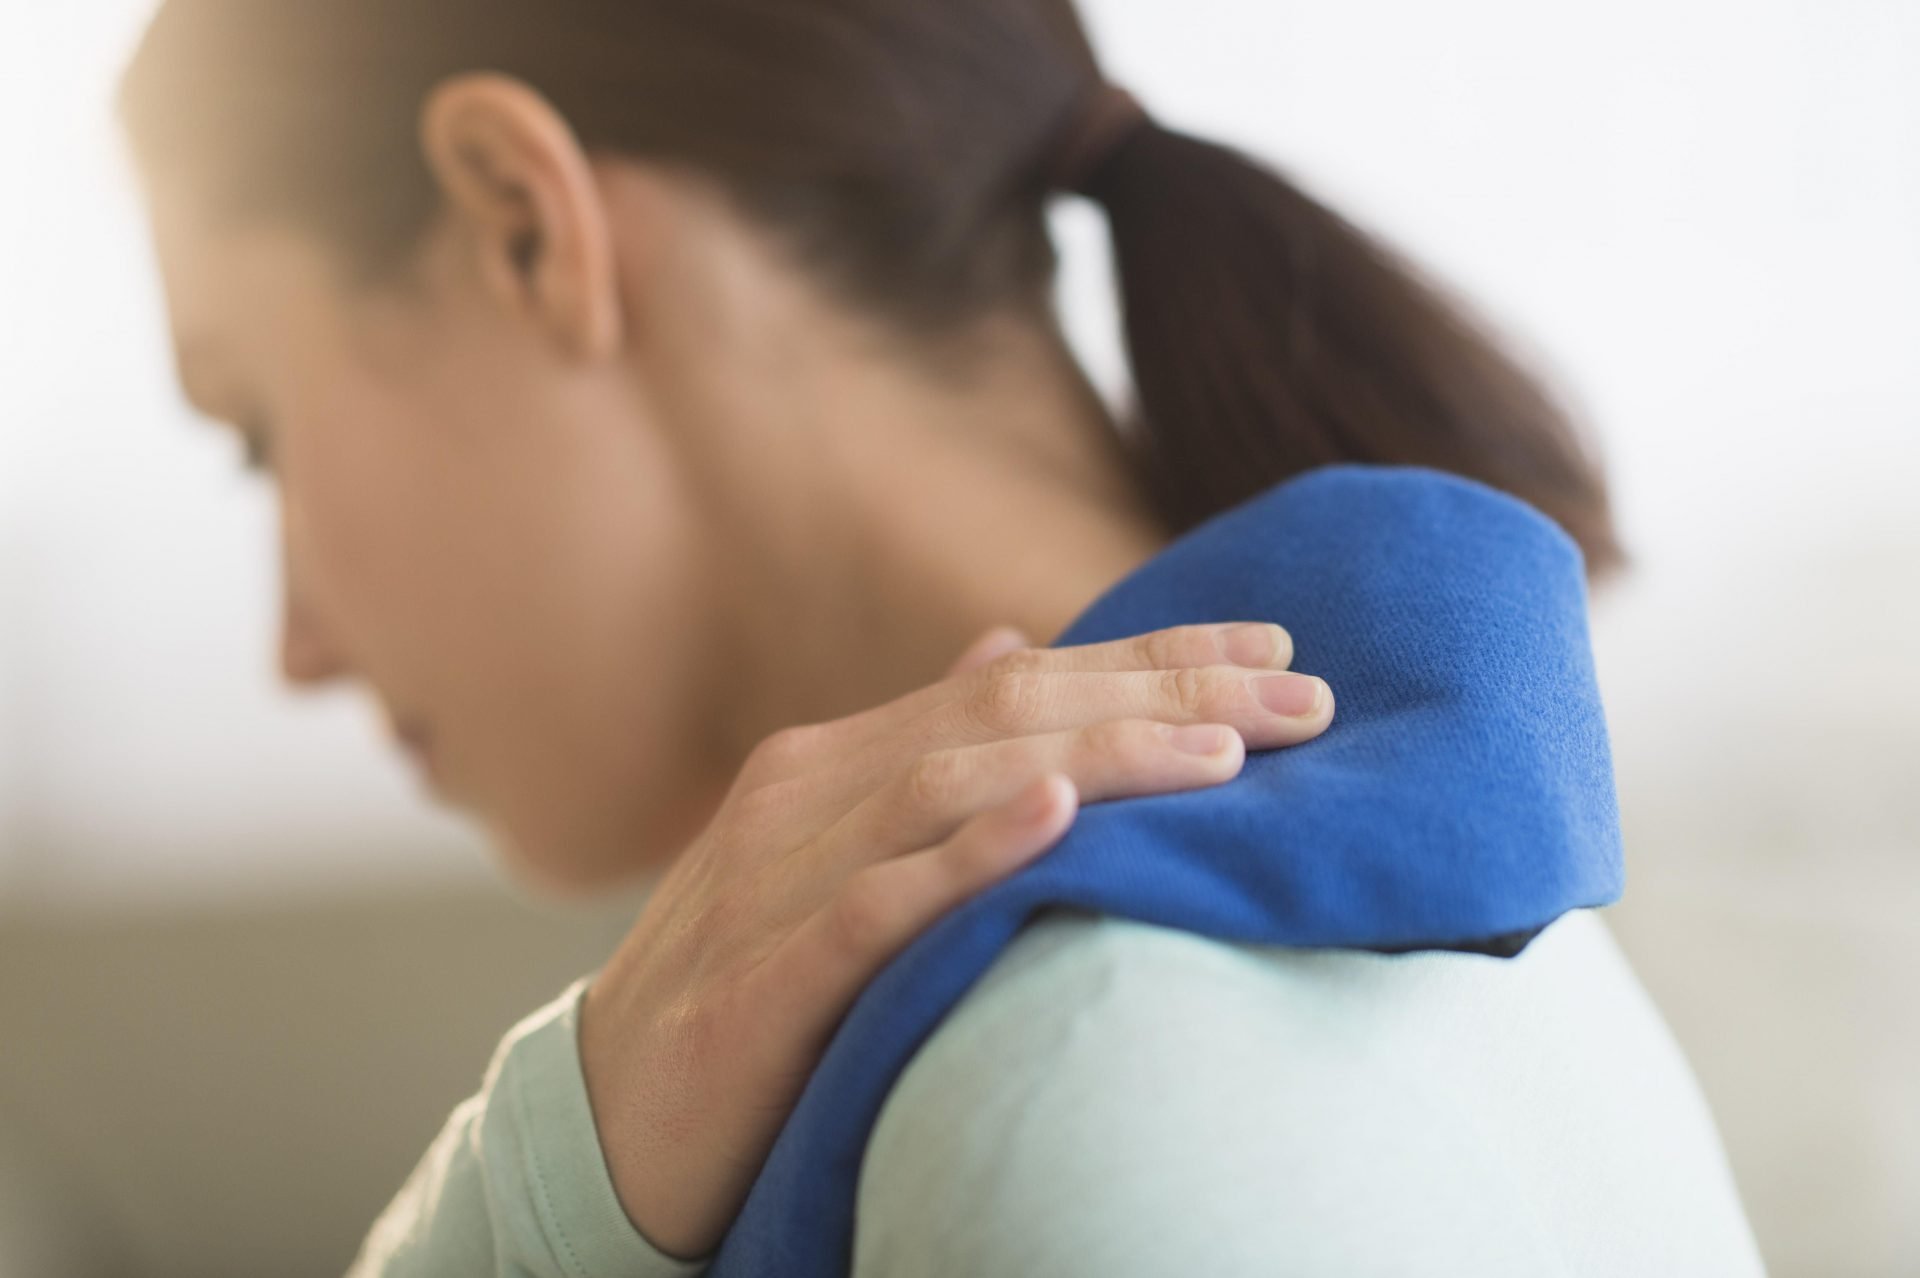 Can Breast Cancer Cause Shoulder Pain